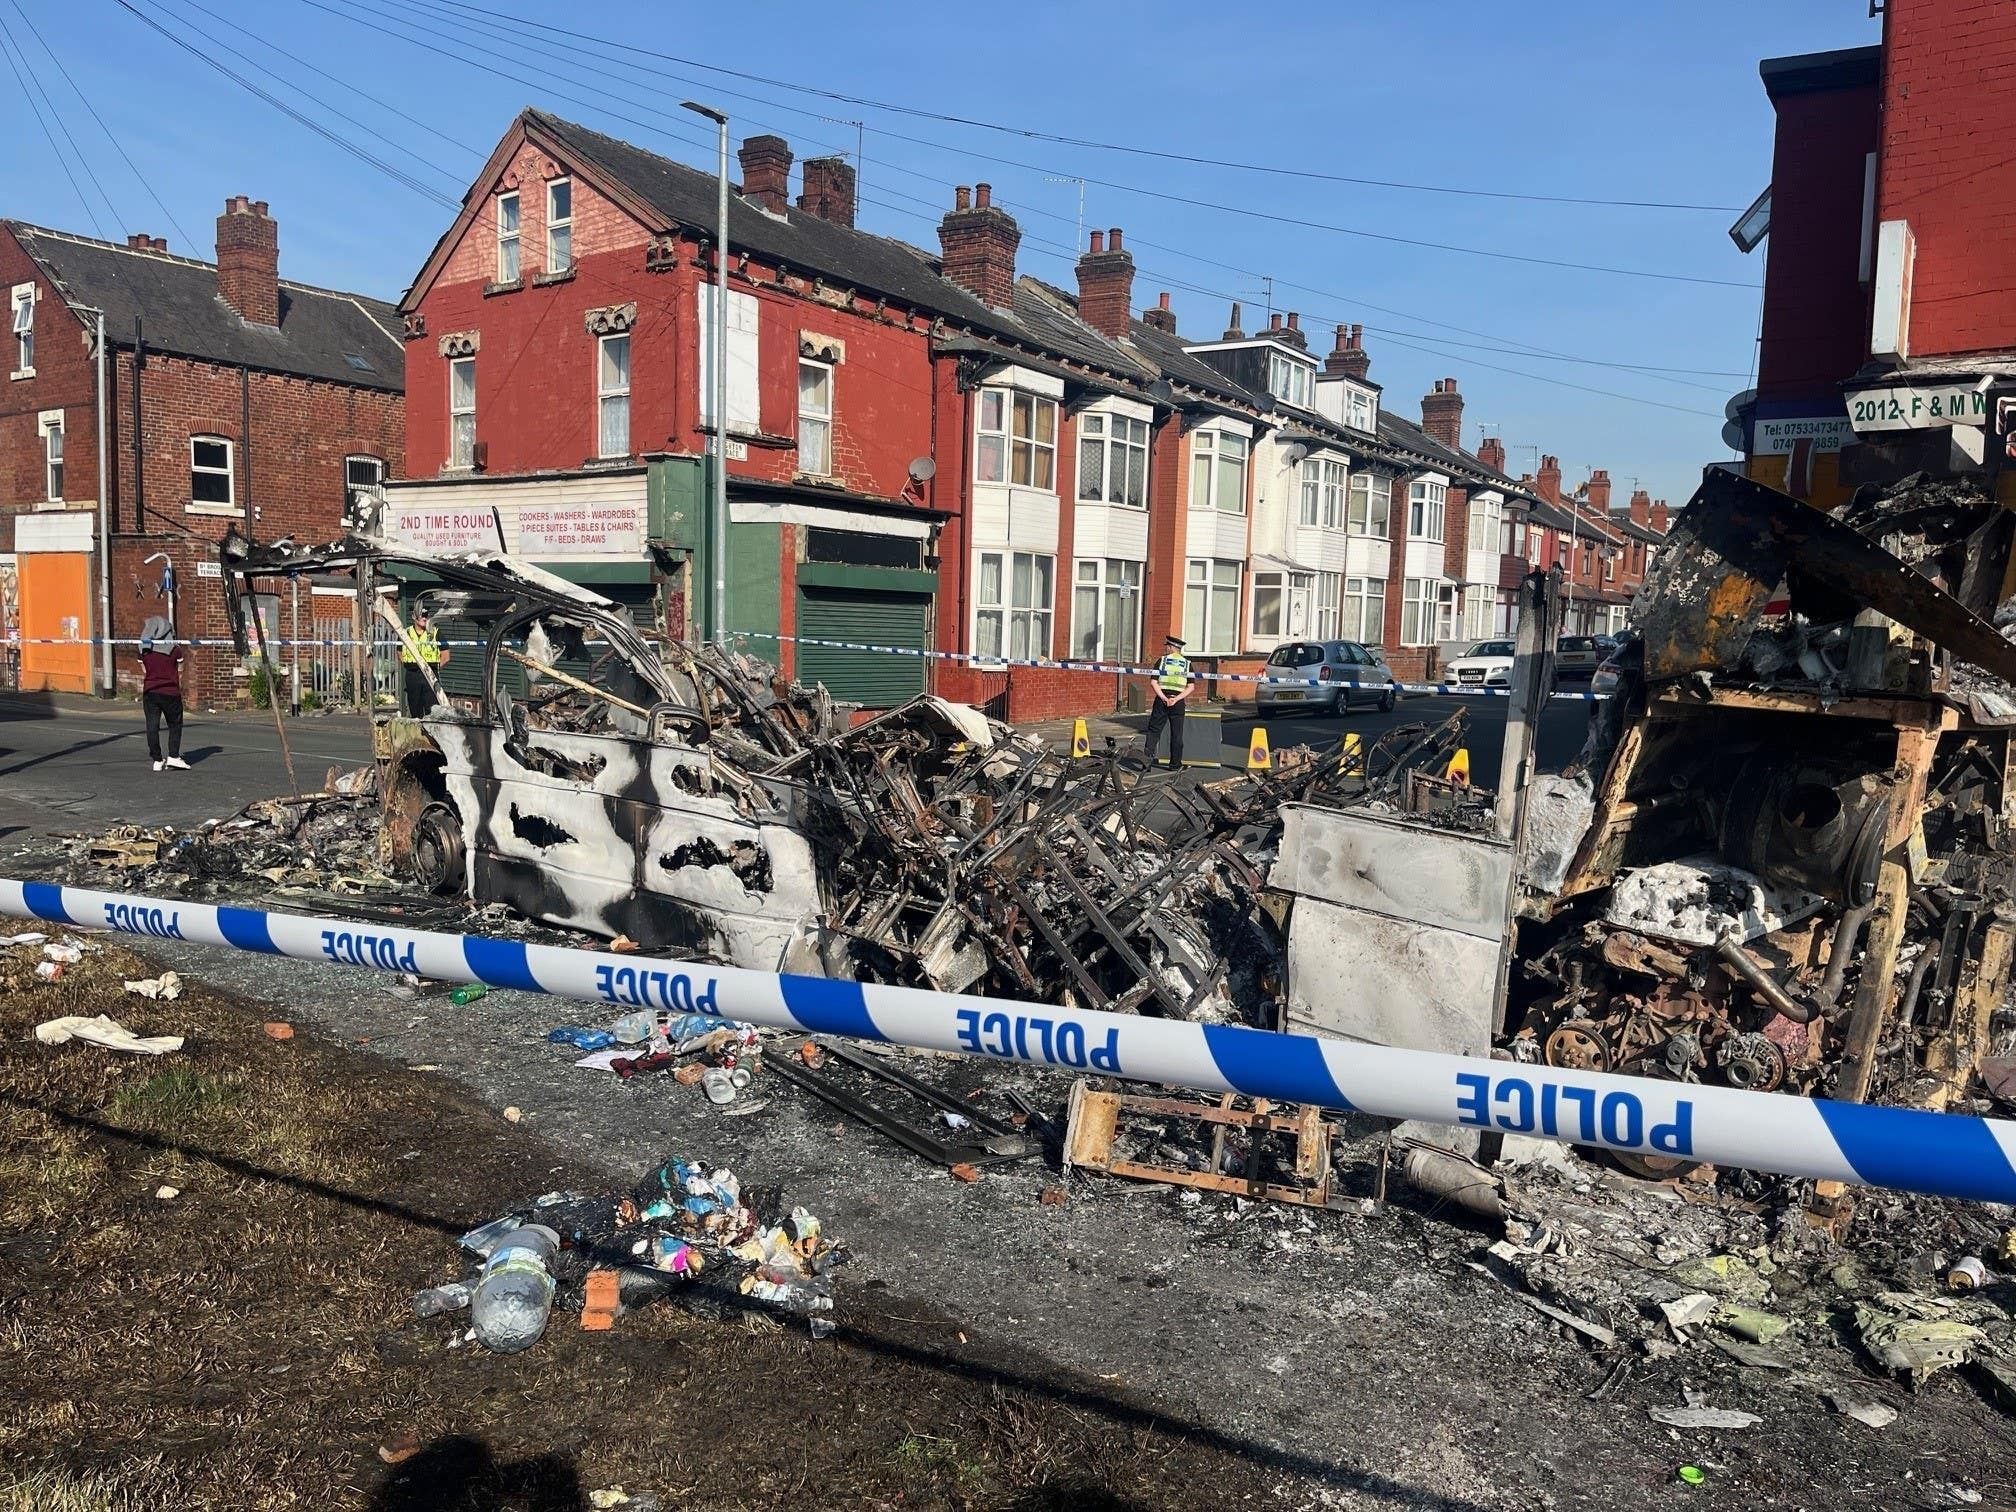 Man intends to deny arson and violent disorder after Harehills disturbances